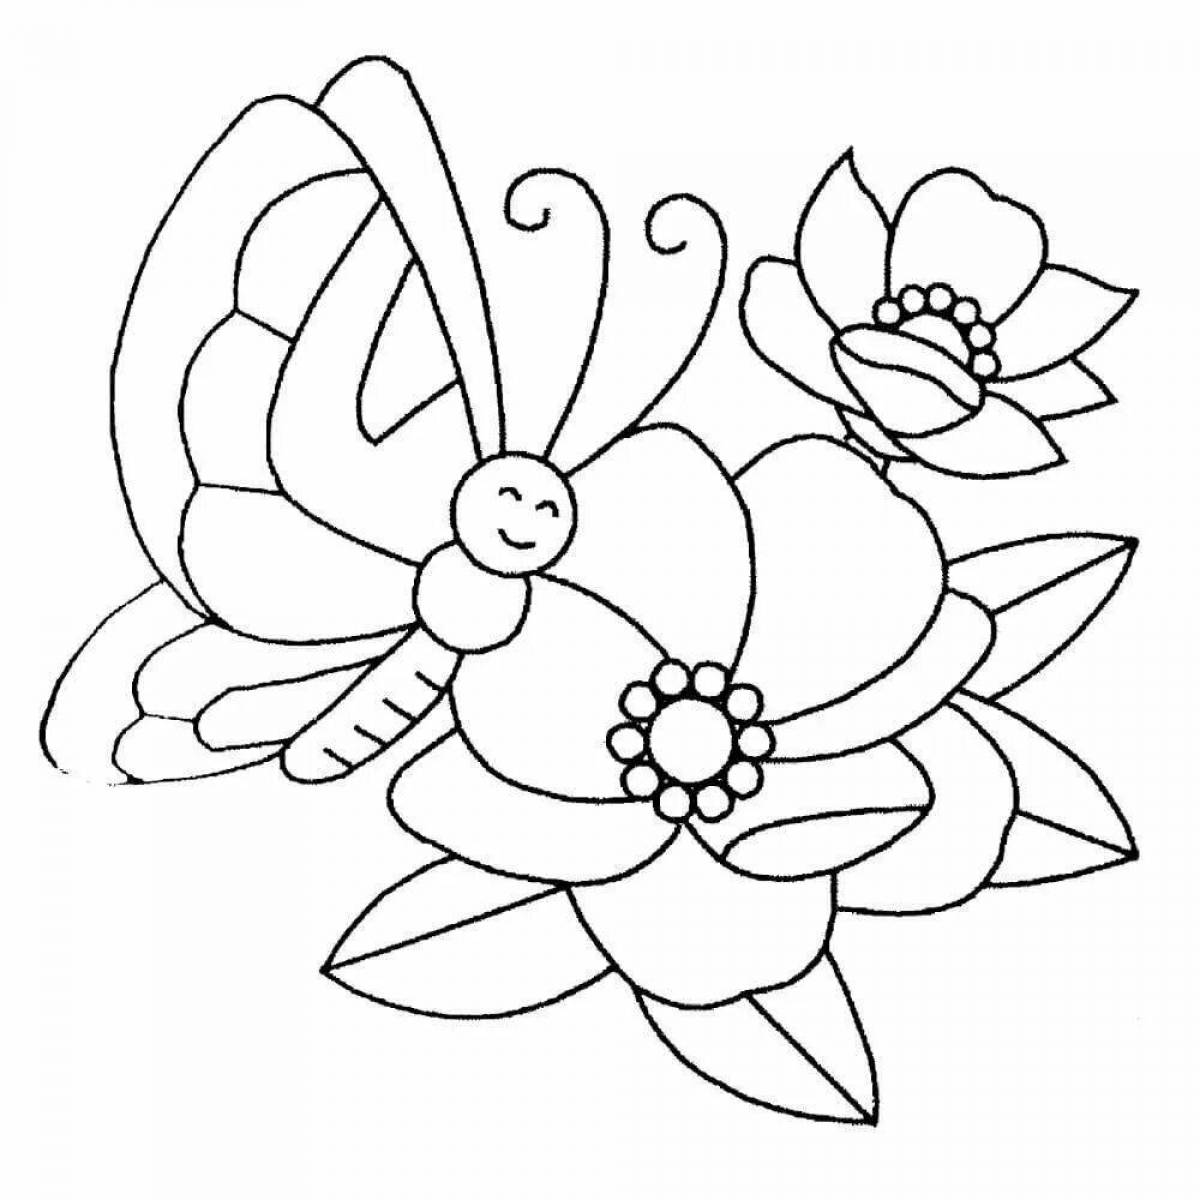 Coloring flowers for children 4-5 years old